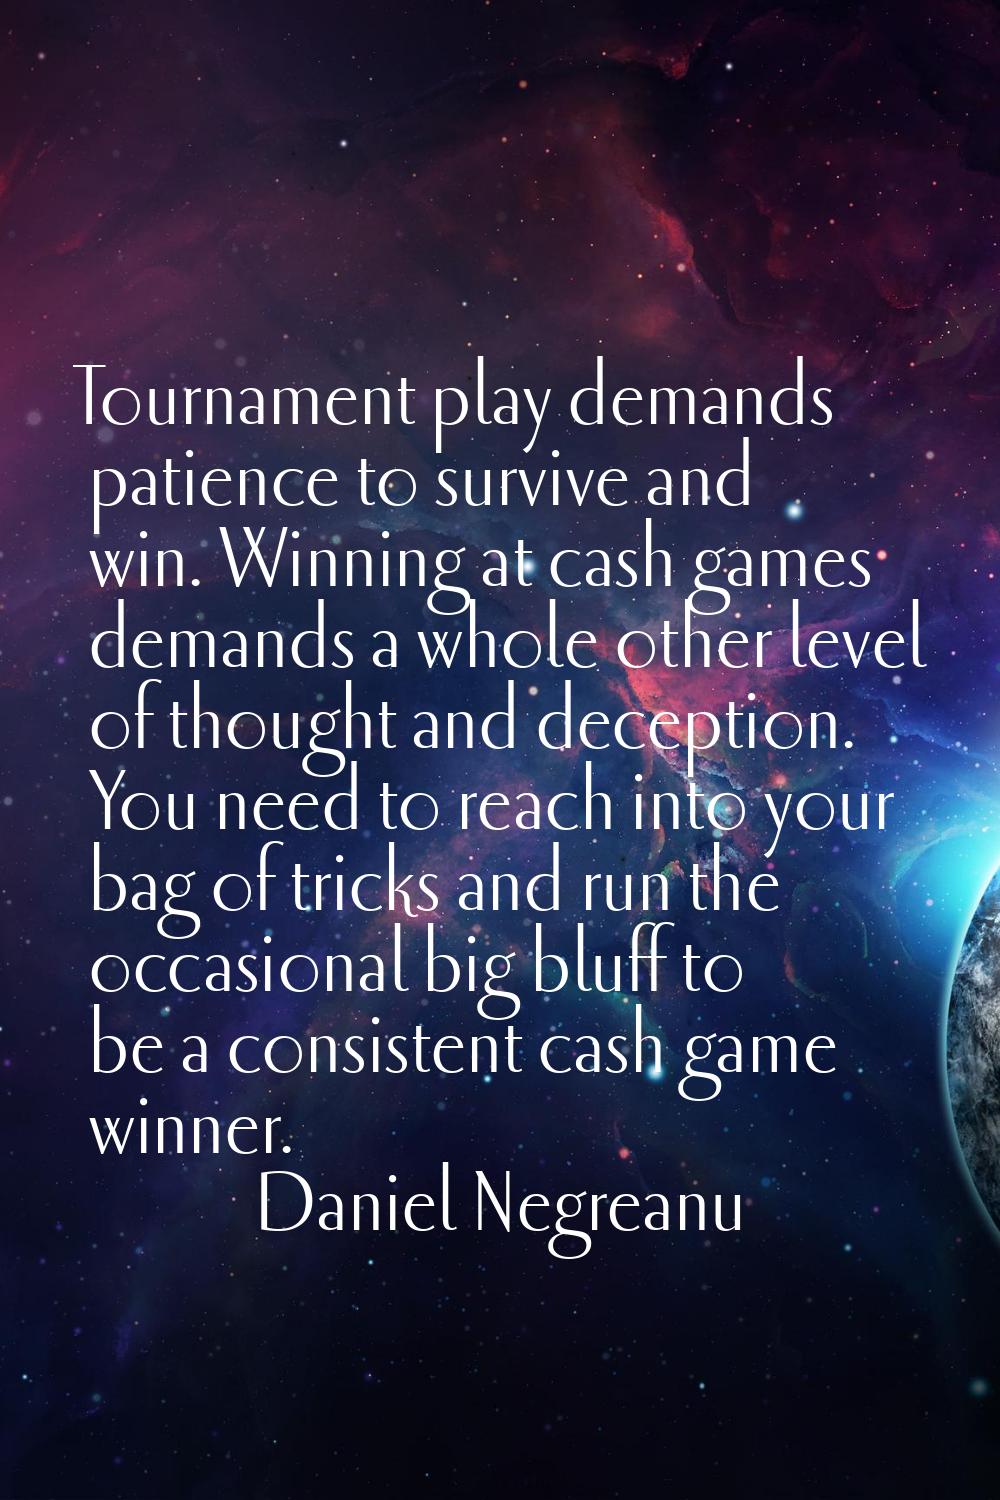 Tournament play demands patience to survive and win. Winning at cash games demands a whole other le